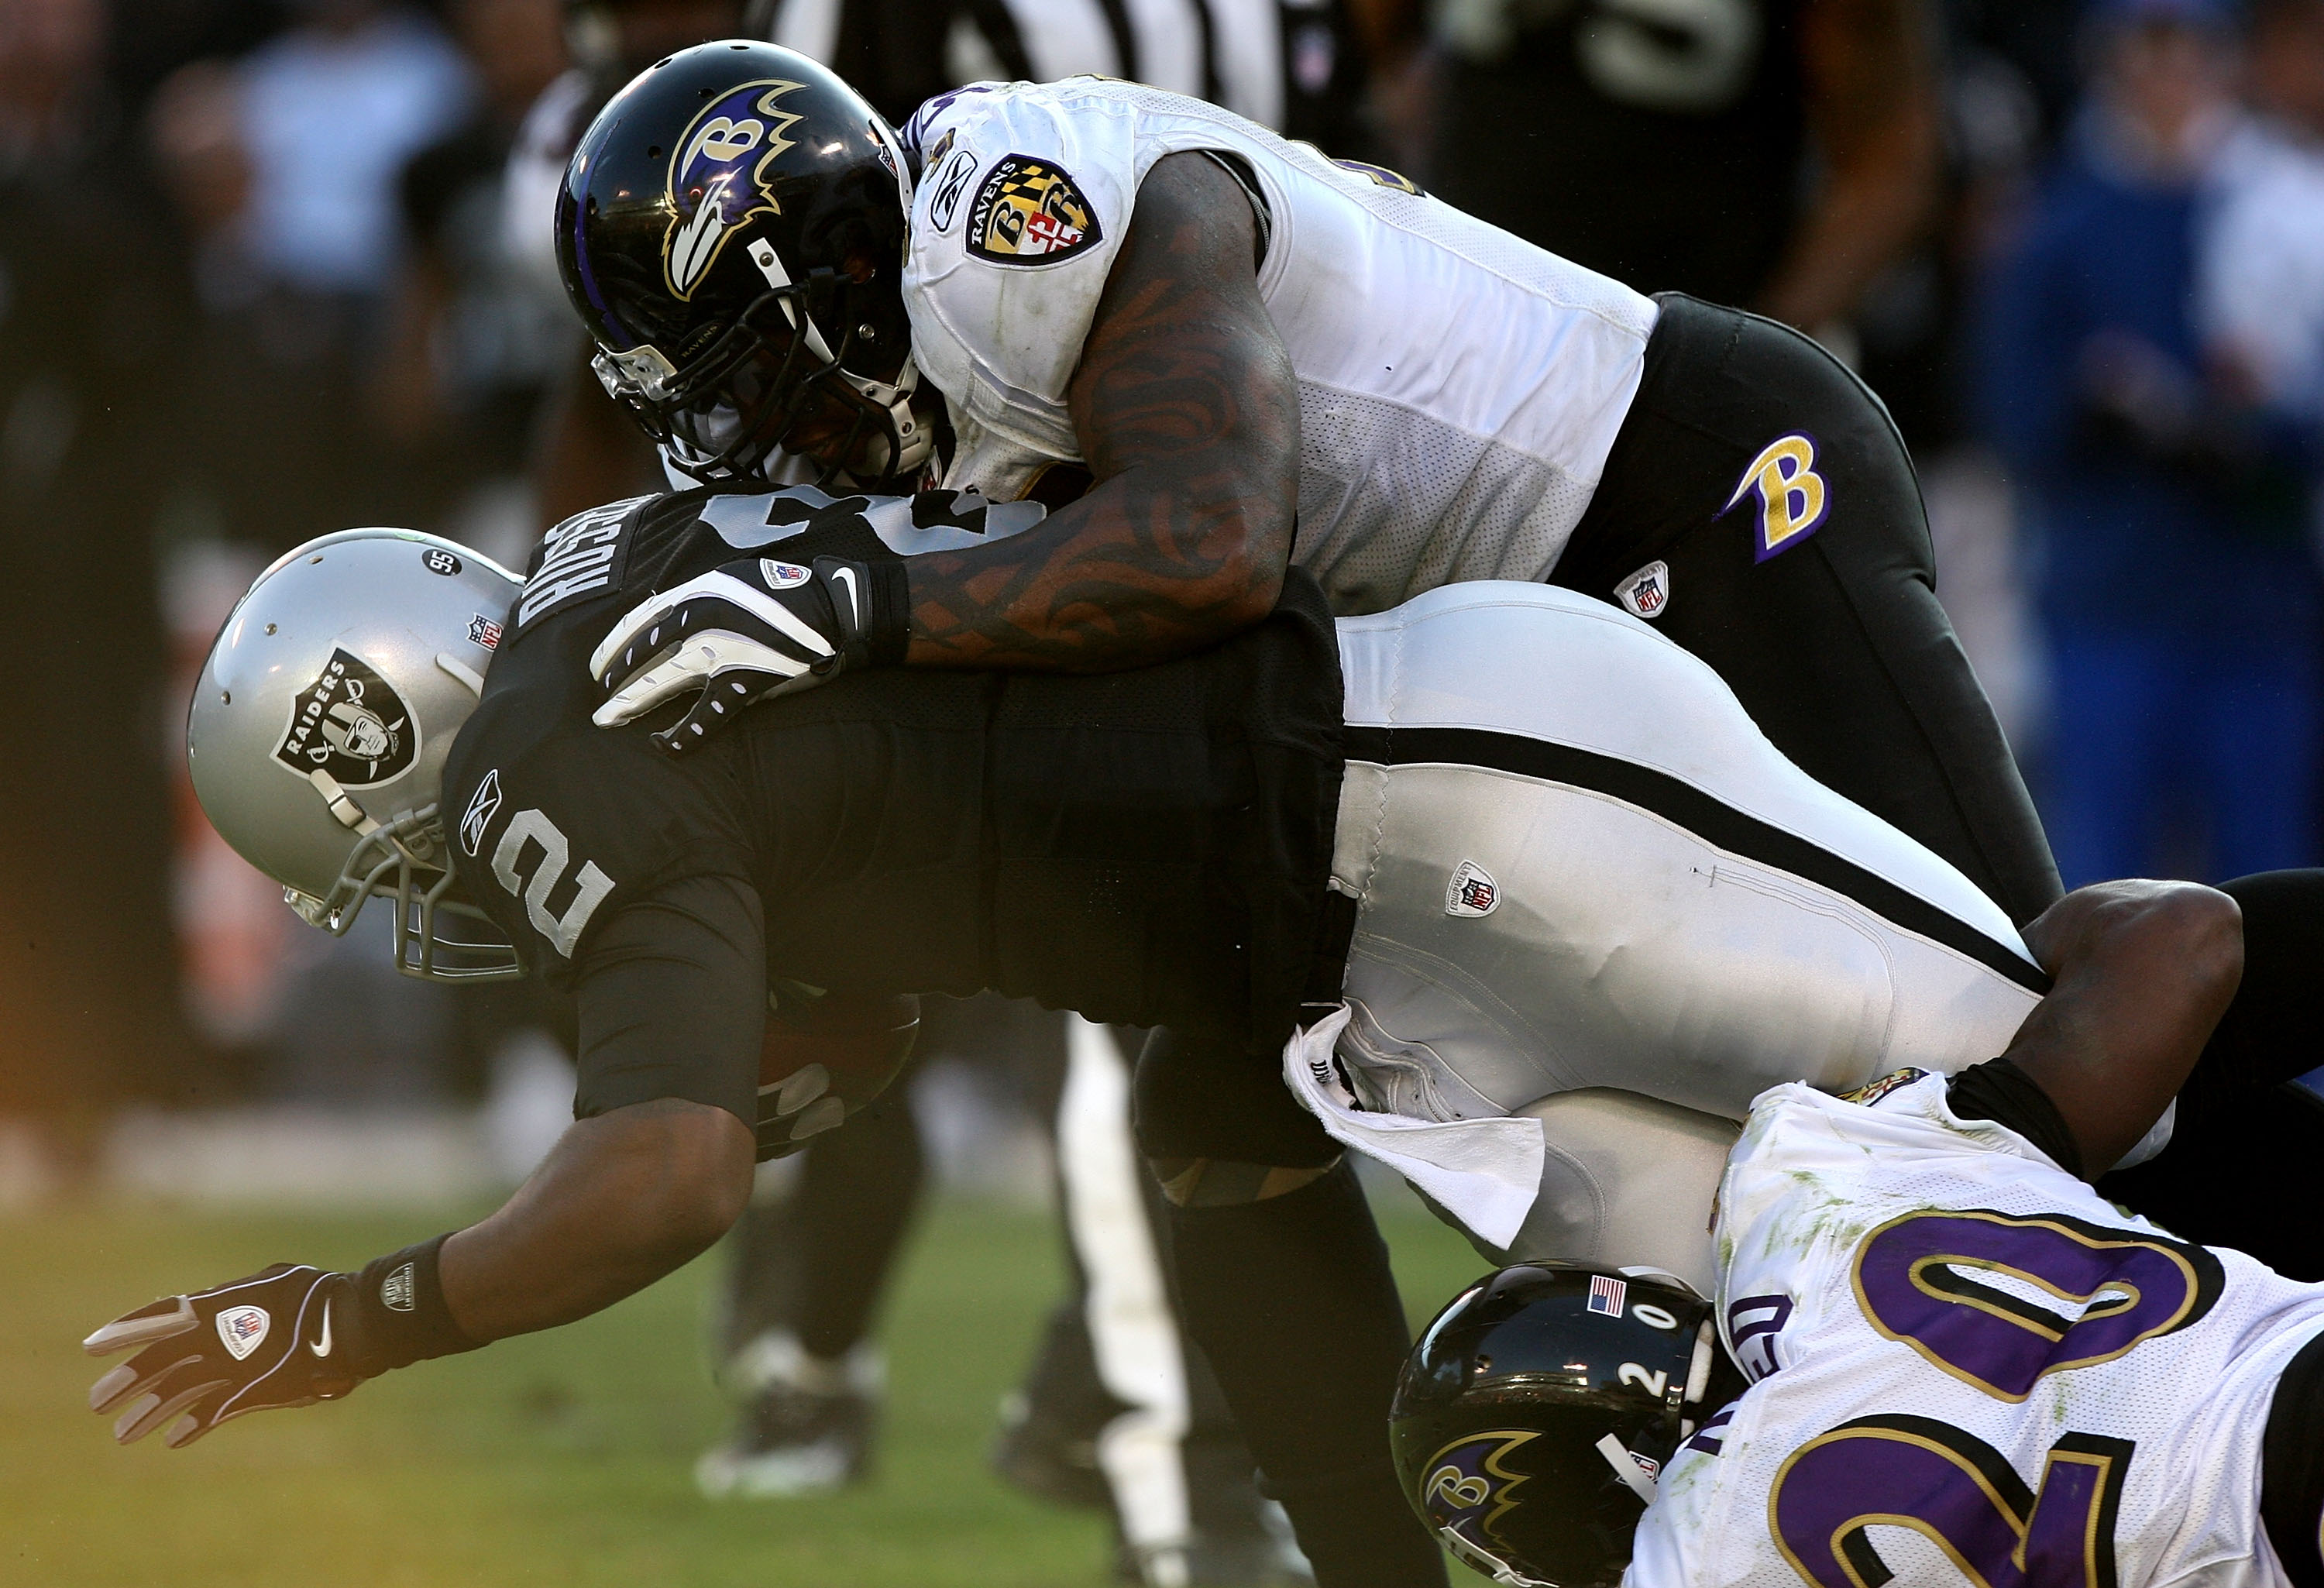 OAKLAND, CA - JANUARY 3: Terrell Suggs #55 of the Baltimore Ravens tackles JaMarcus Russell #2 of the Oakland Raiders during an NFL game at Oakland-Alameda County Coliseum on January 3, 2010 in Oakland, California. (Photo by Jed Jacobsohn/Getty Images)